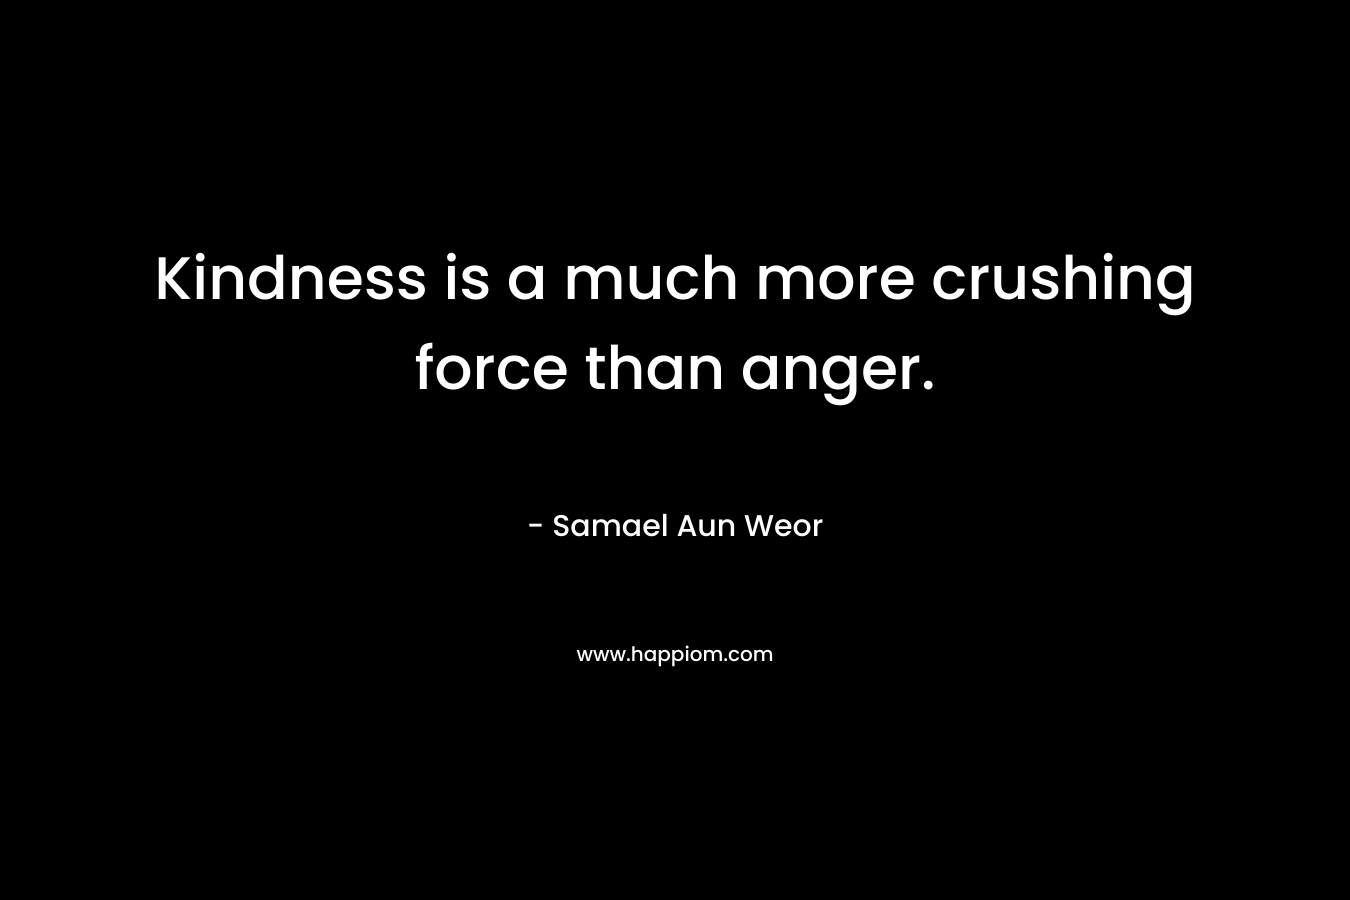 Kindness is a much more crushing force than anger.